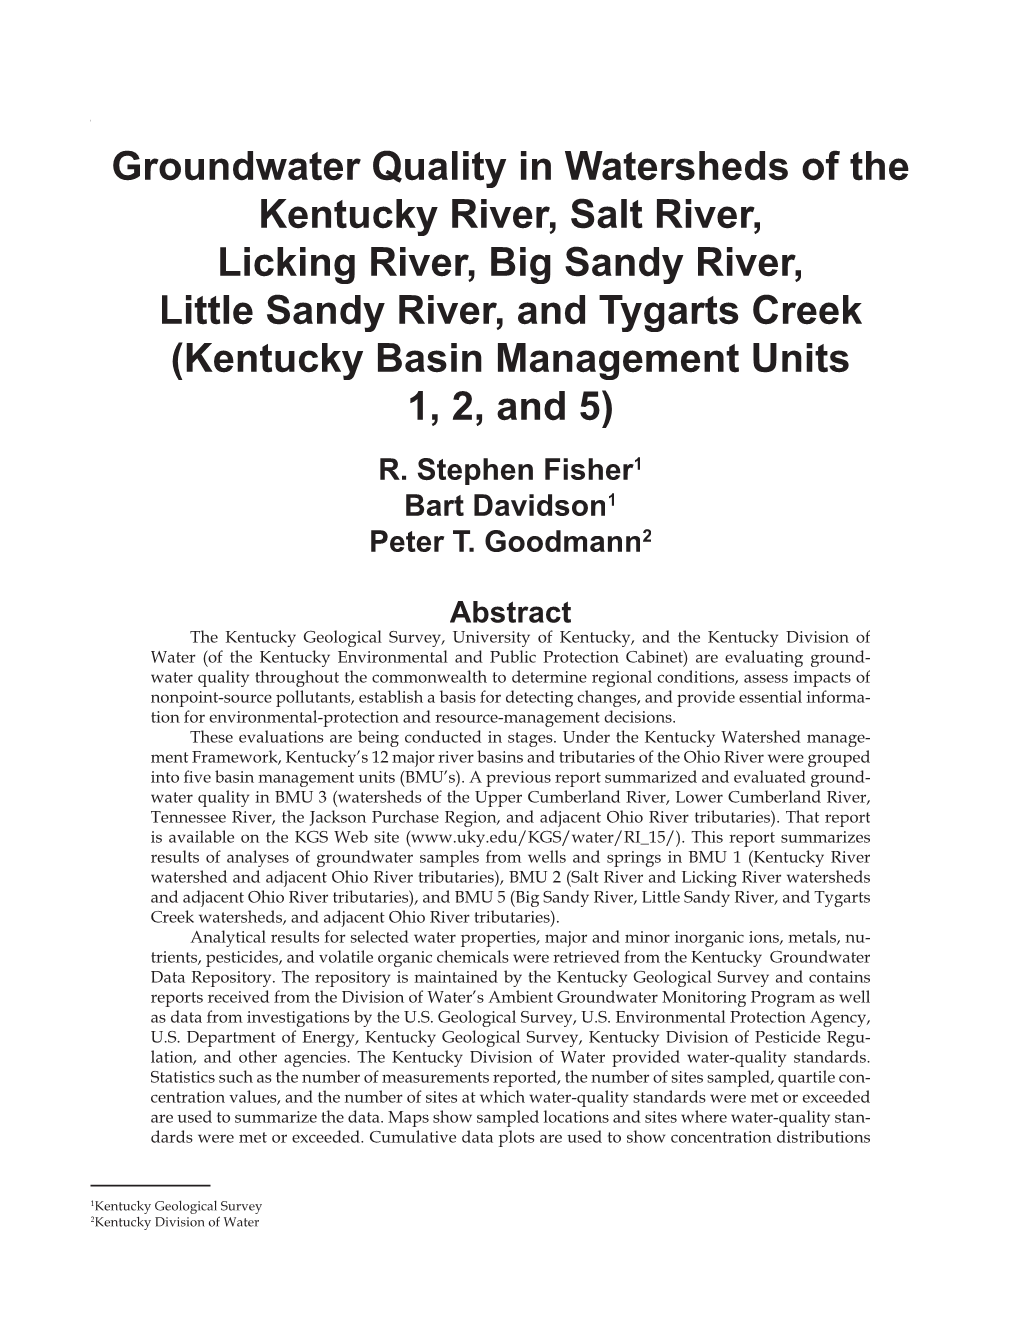 Groundwater Quality in Watersheds of the Kentucky River, Salt River, Licking River, Big Sandy River, Little Sandy River, And